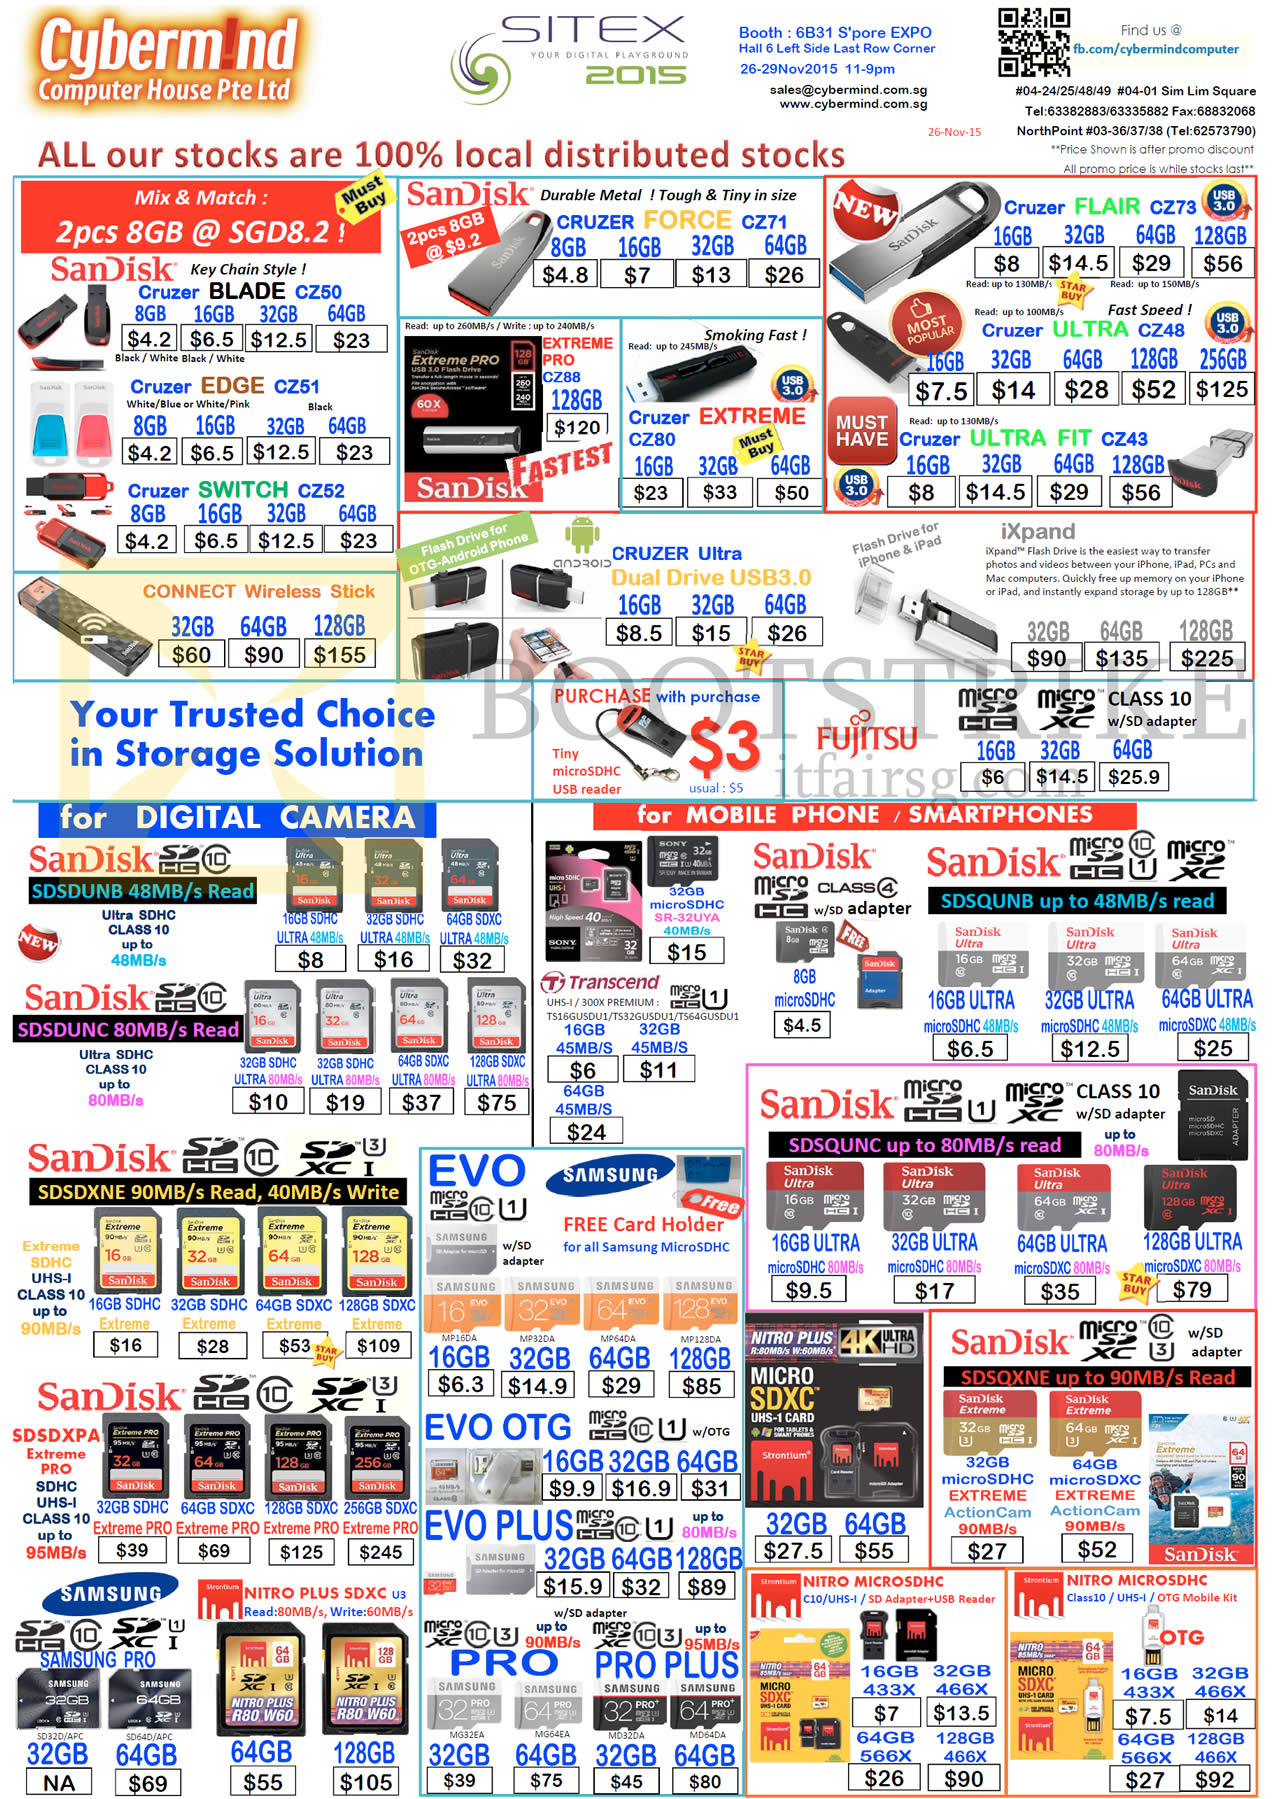 SITEX 2015 price list image brochure of Cybermind Thumb Drives, SD Cards, Sandisk, Cruzer Blade, Force, Flair, Ultra, Ultra Fit, Switch, Evo, Evo OTG, Evo Plus, Pro Plus